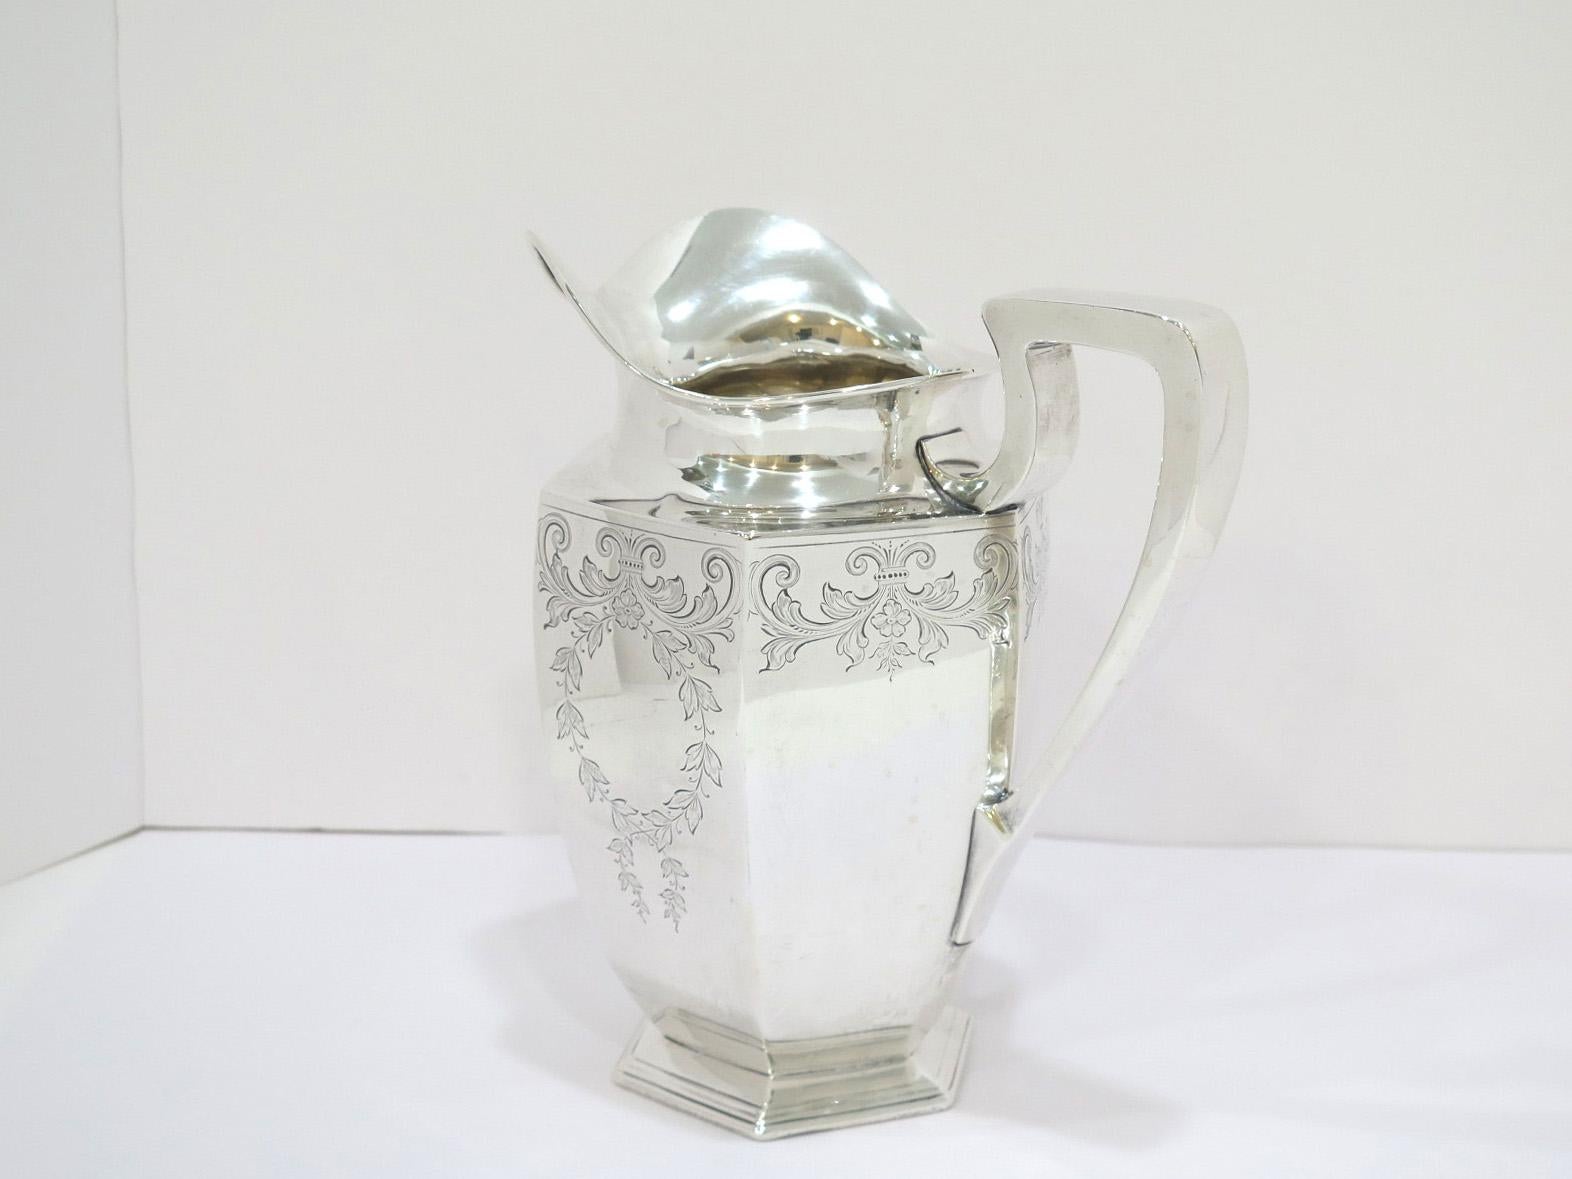 20th Century 9.25 in Sterling Silver Dominick & Haff Antique Floral Scroll Hexagonal Pitcher